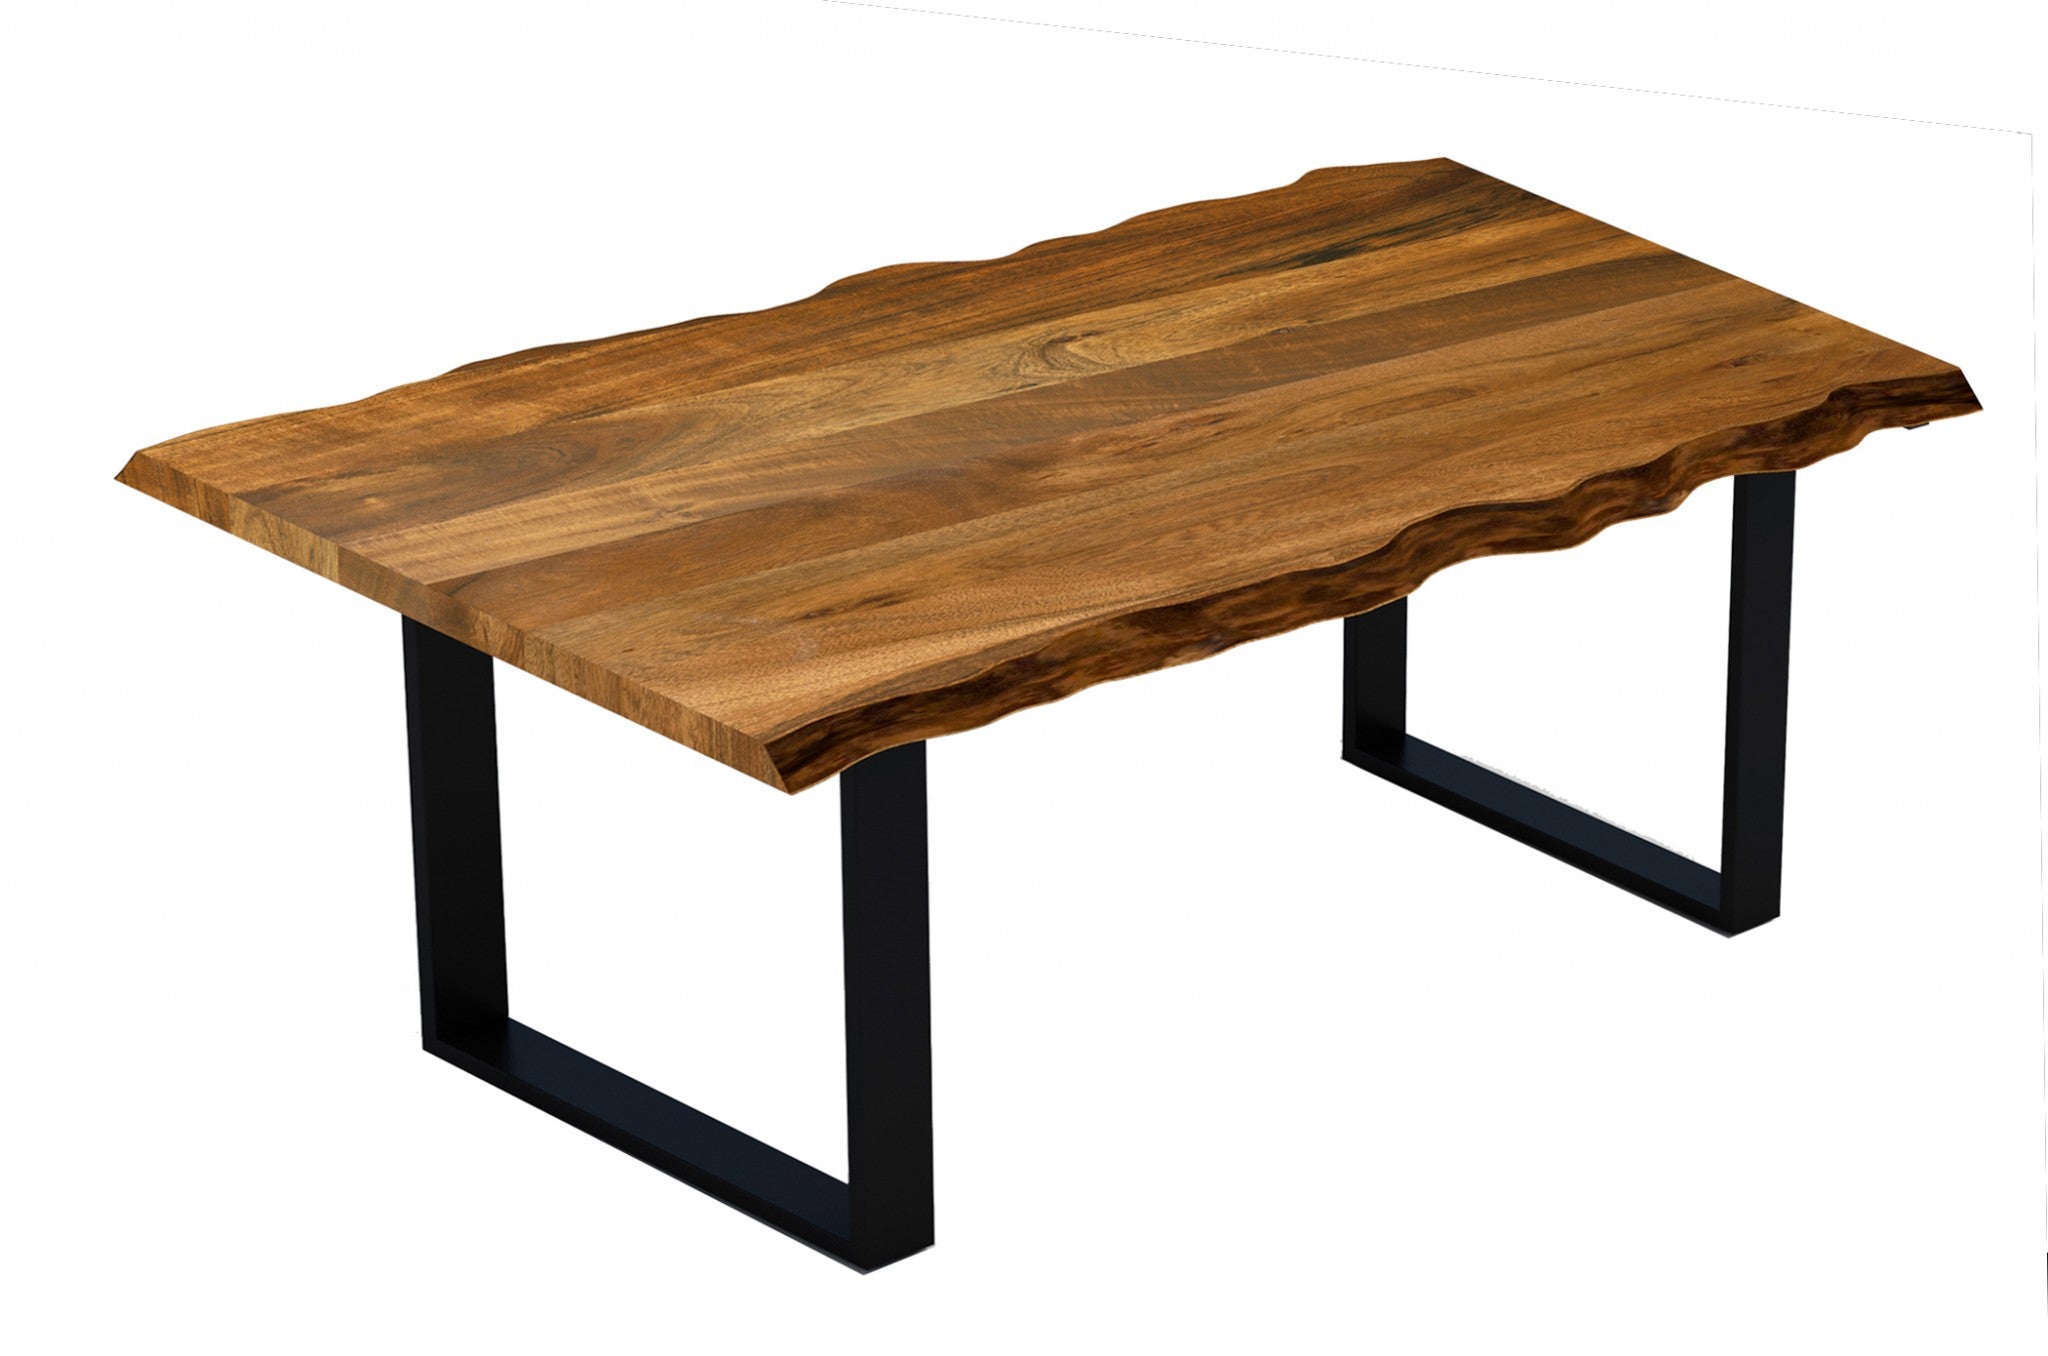 68" Brown And Black Solid Wood Dining Table